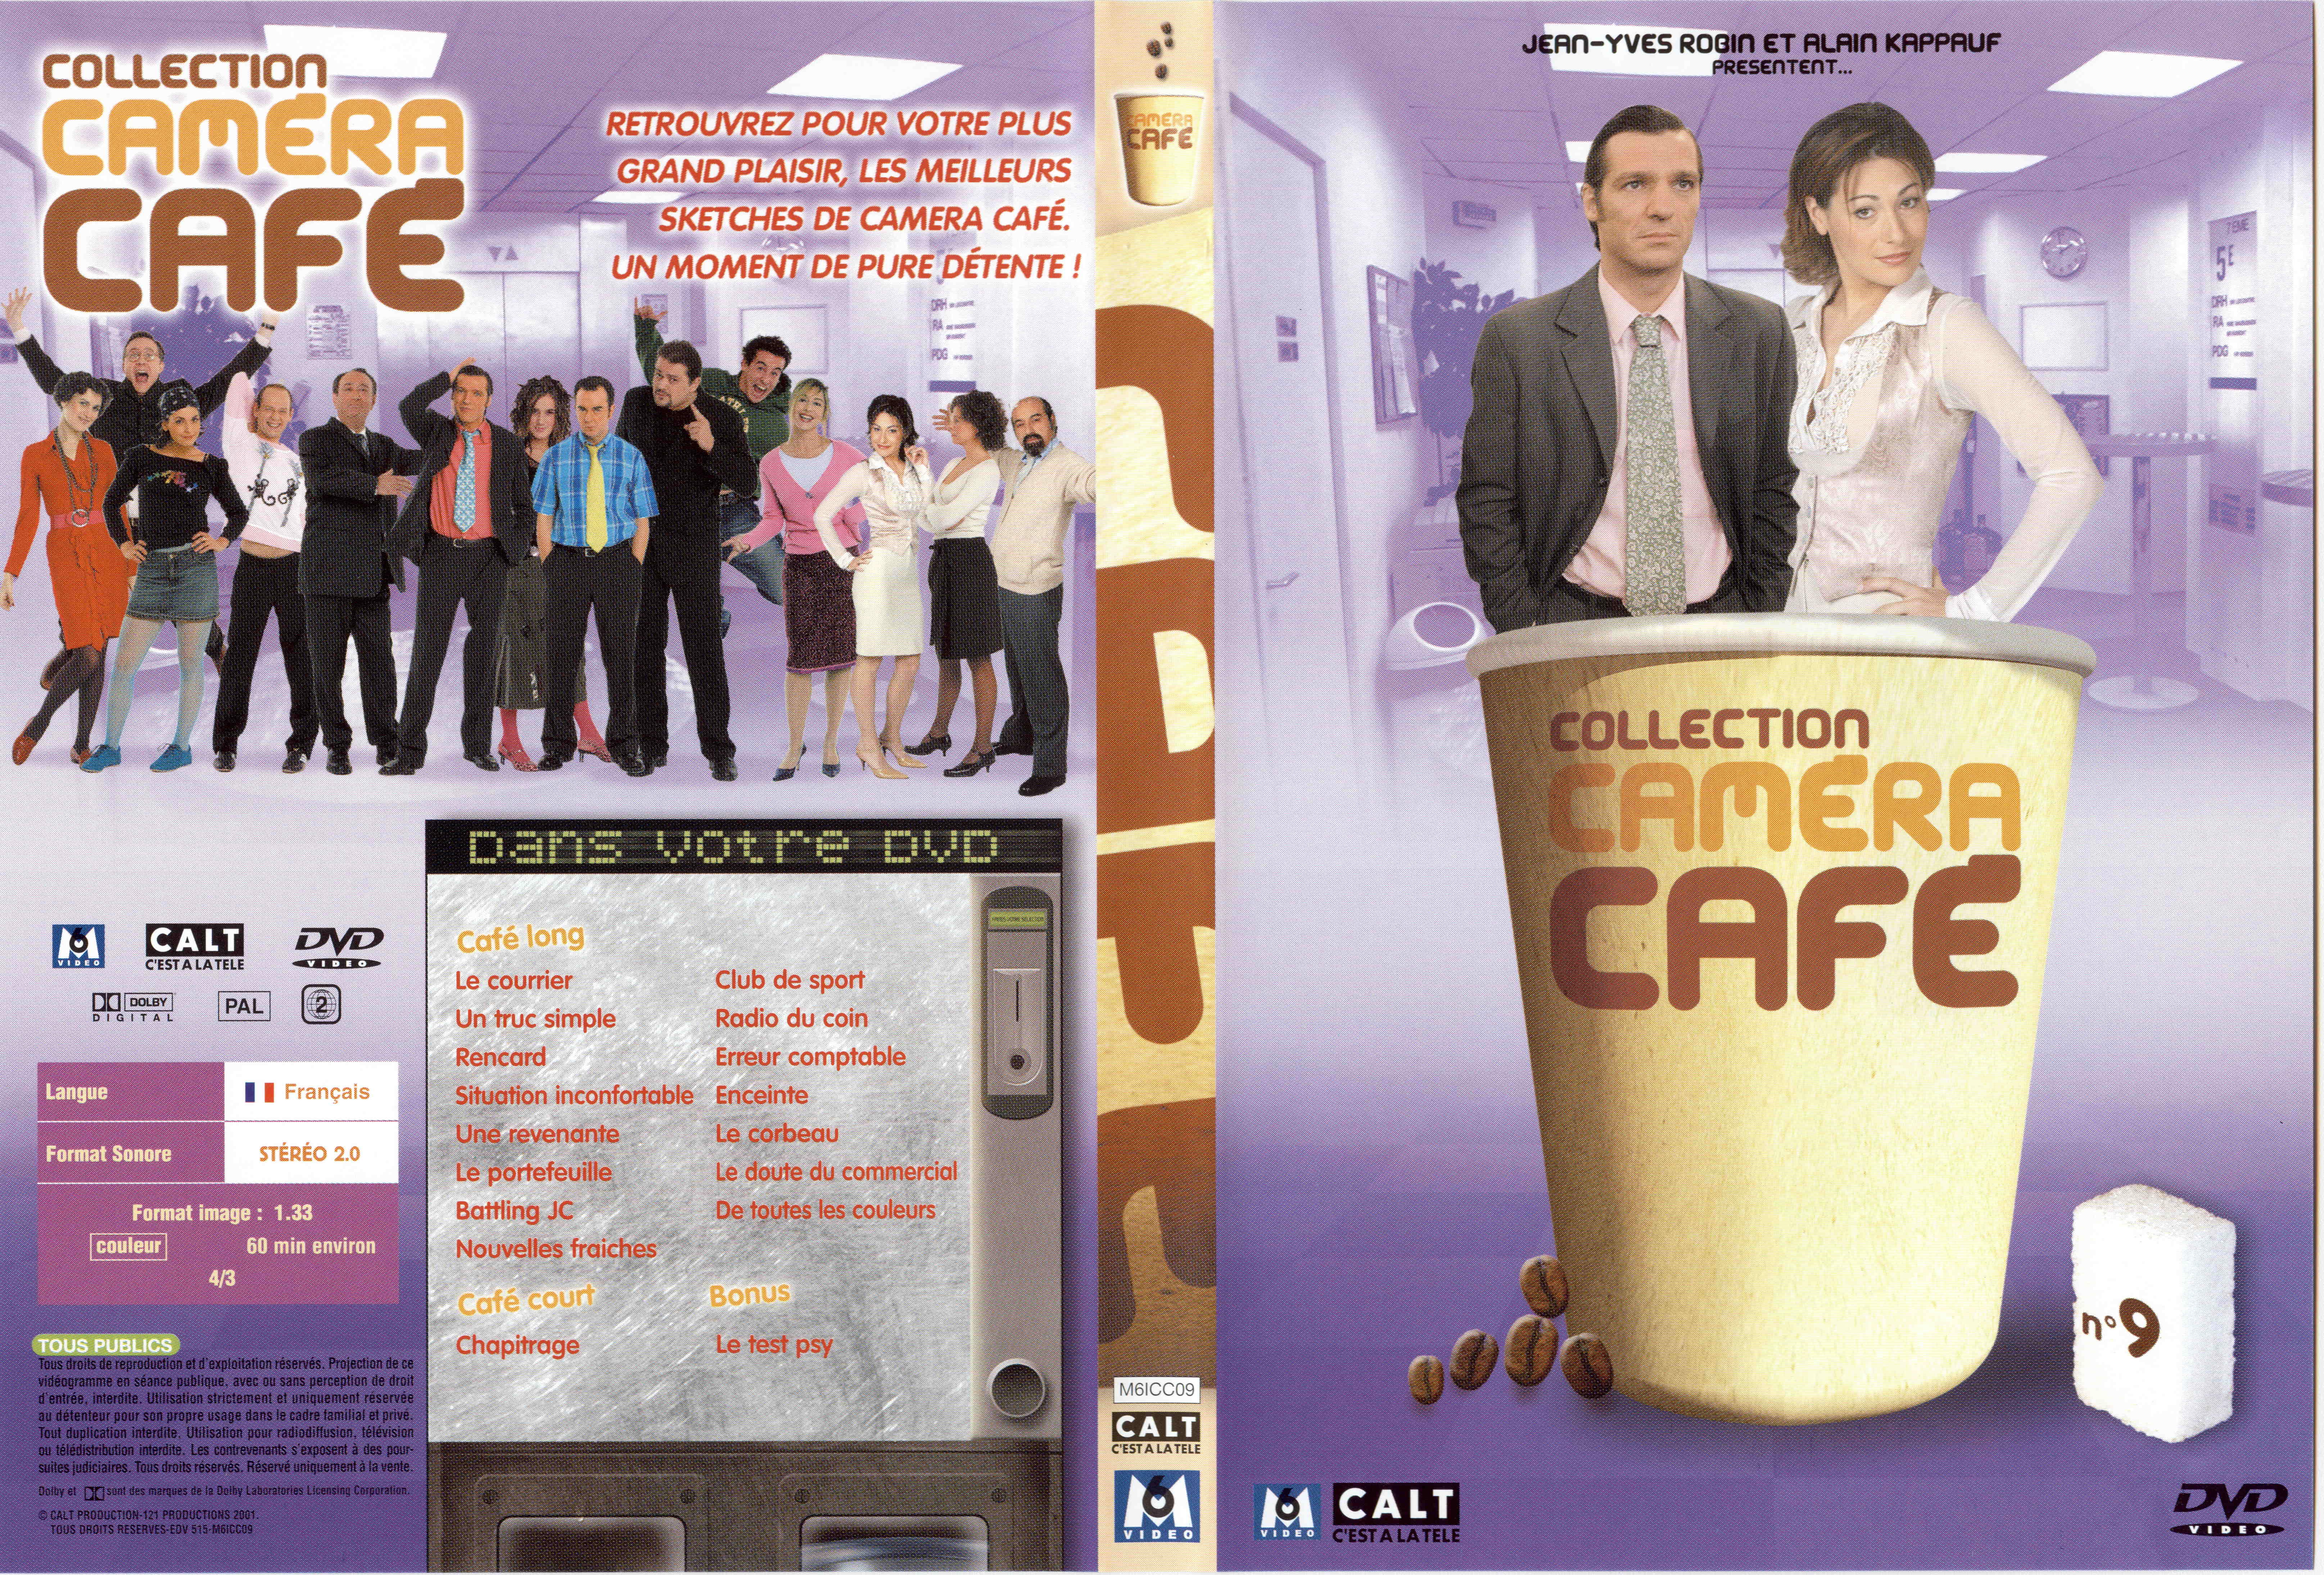 Jaquette DVD Collection Camera Cafe vol 09